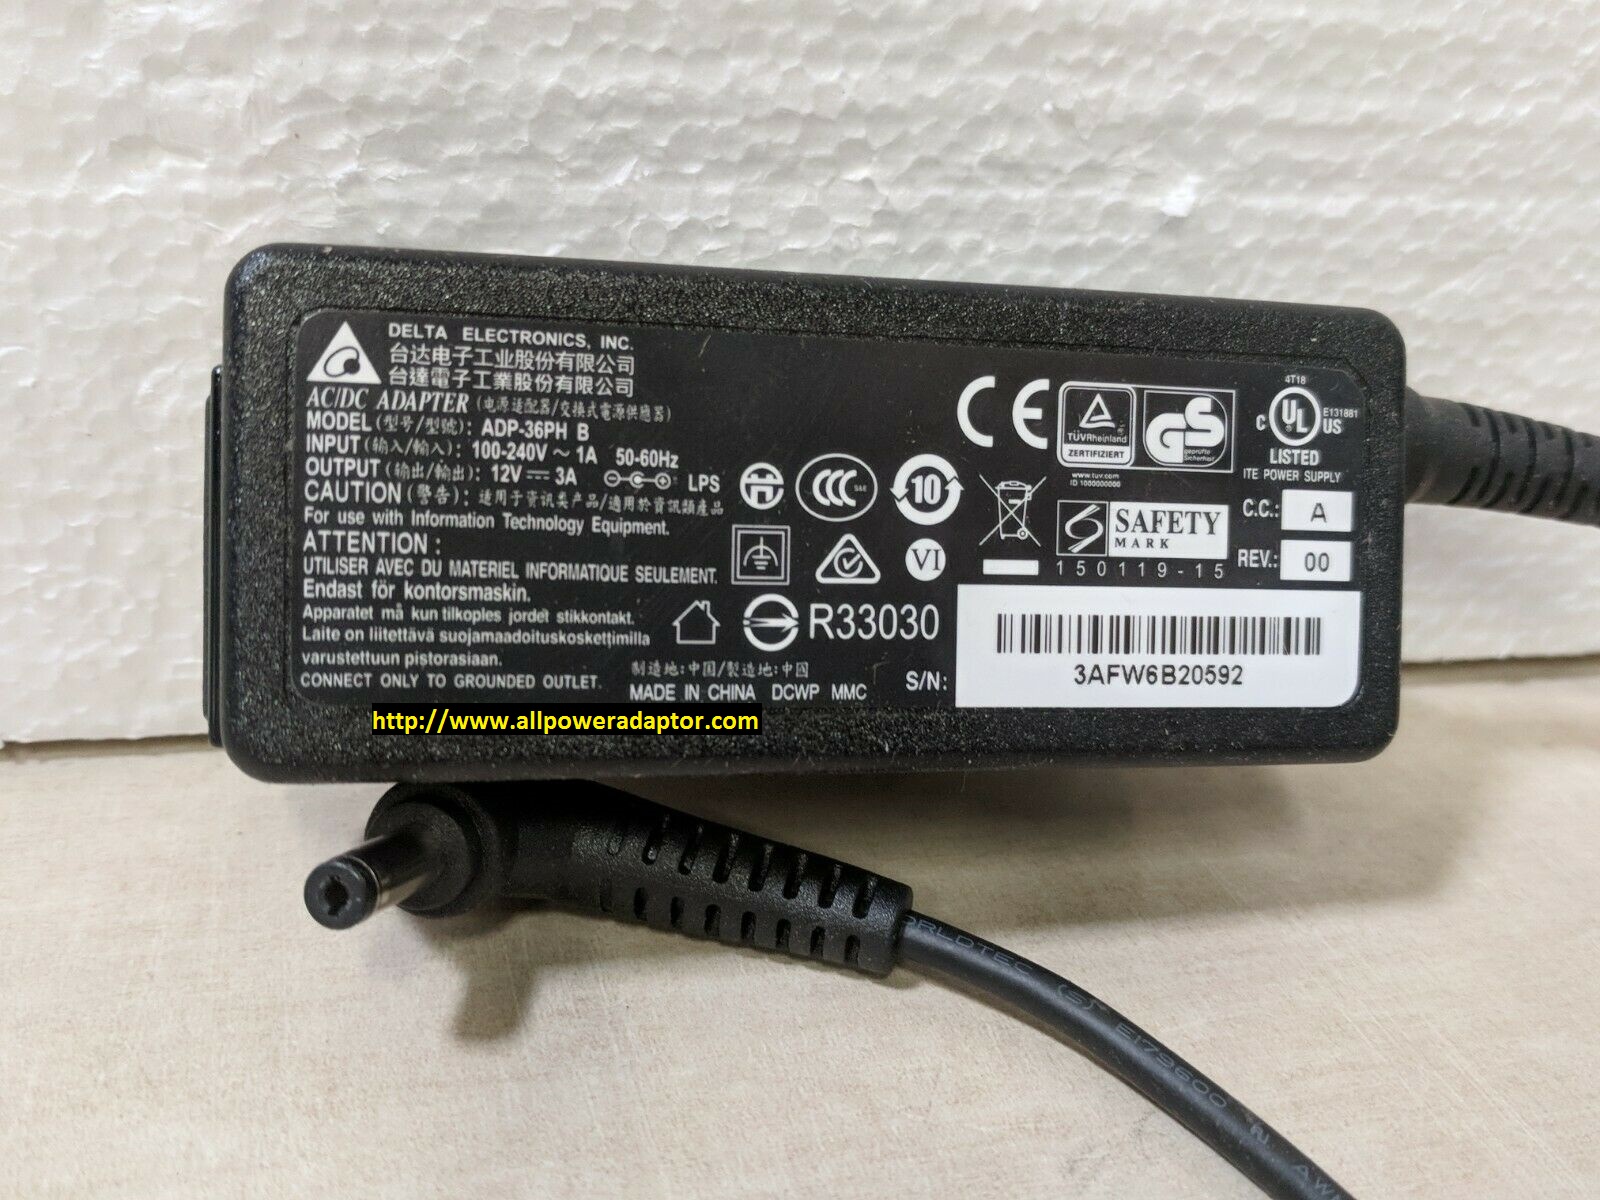 NEW Delta ADP-36PH B 12V 3A AC ADAPTER POWER SUPPLY CHARGER Specification: Brand: Delta Model: ADP-36PH B